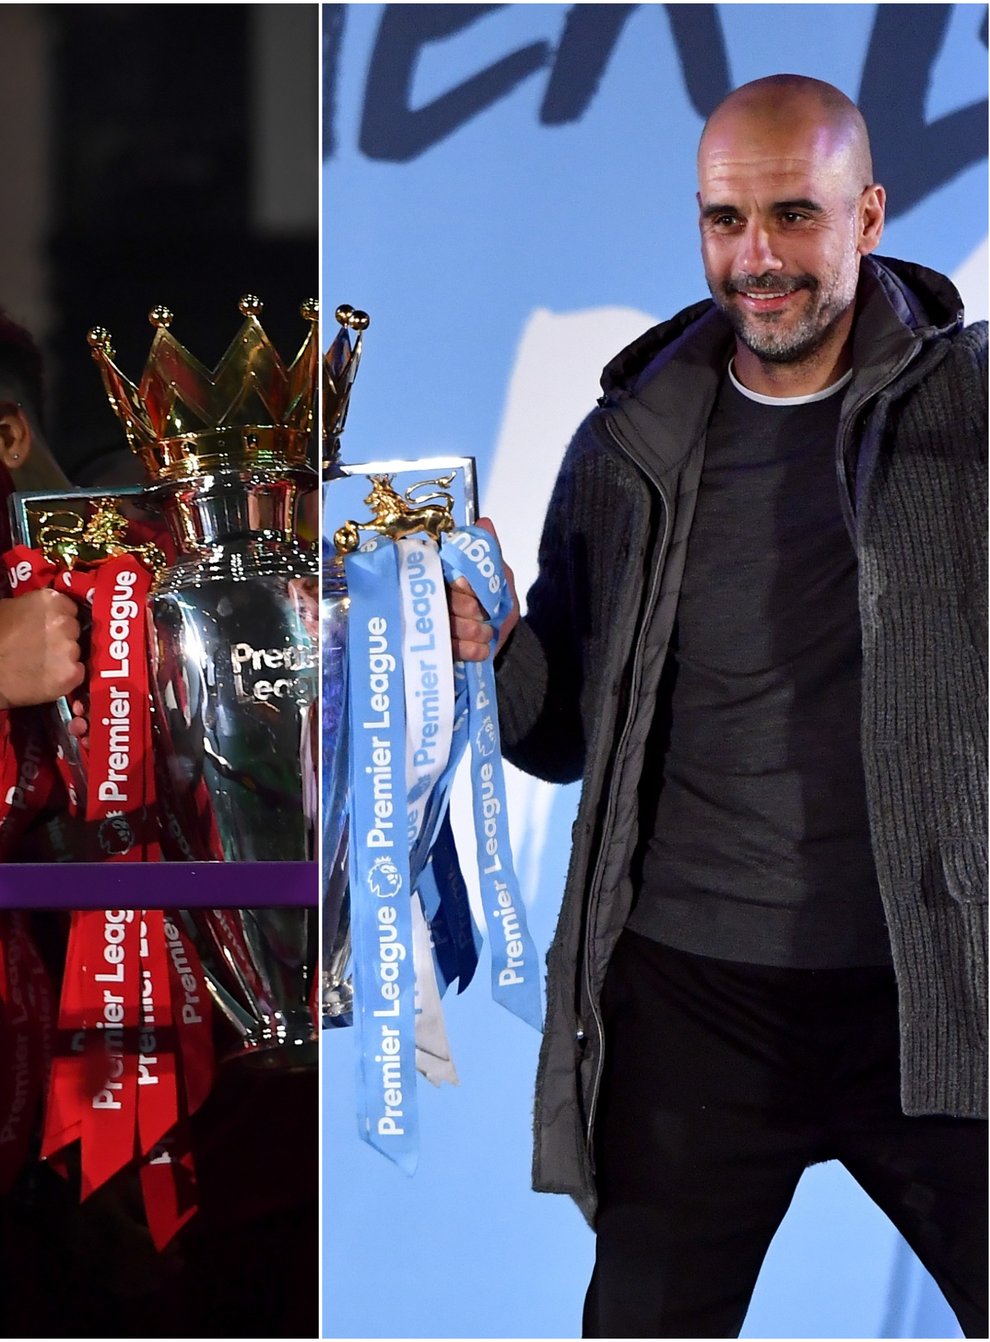 Will Jurgen Klopp, left, or Pep Guardiola be lifting the Premier League trophy this season? (Laurence Griffiths/Anthony Devlin/PA)